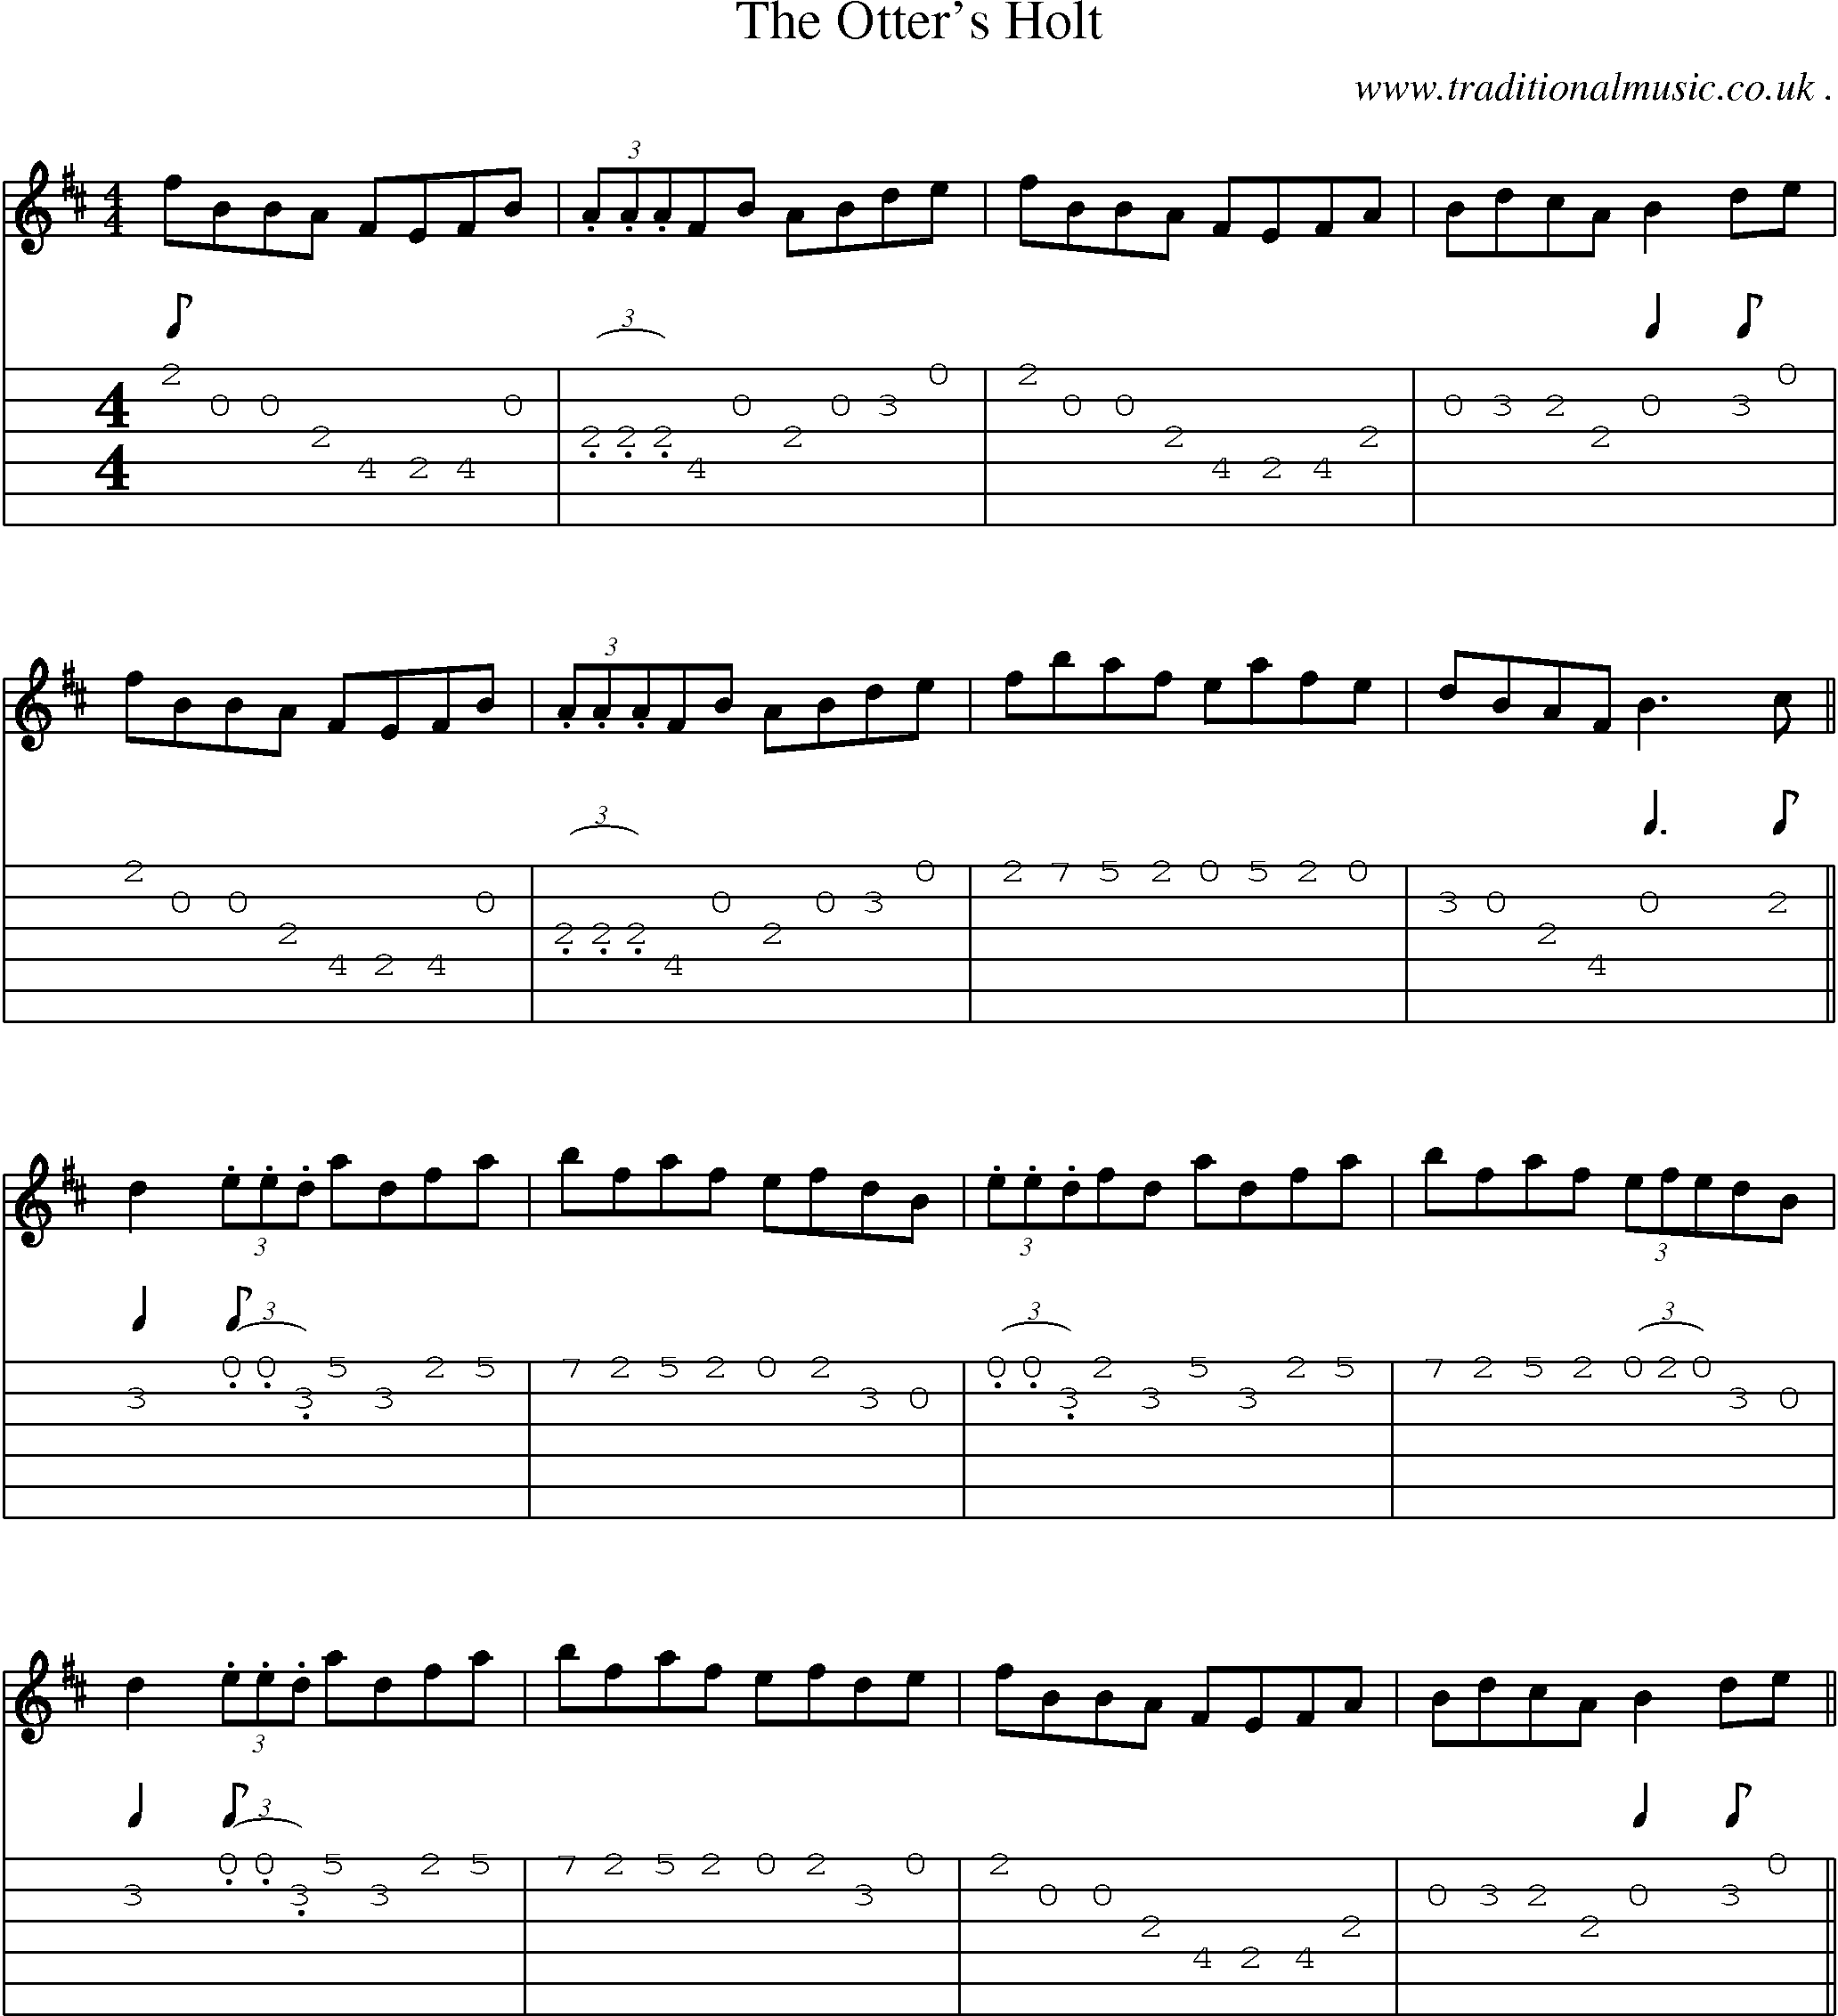 Sheet-Music and Guitar Tabs for The Otters Holt